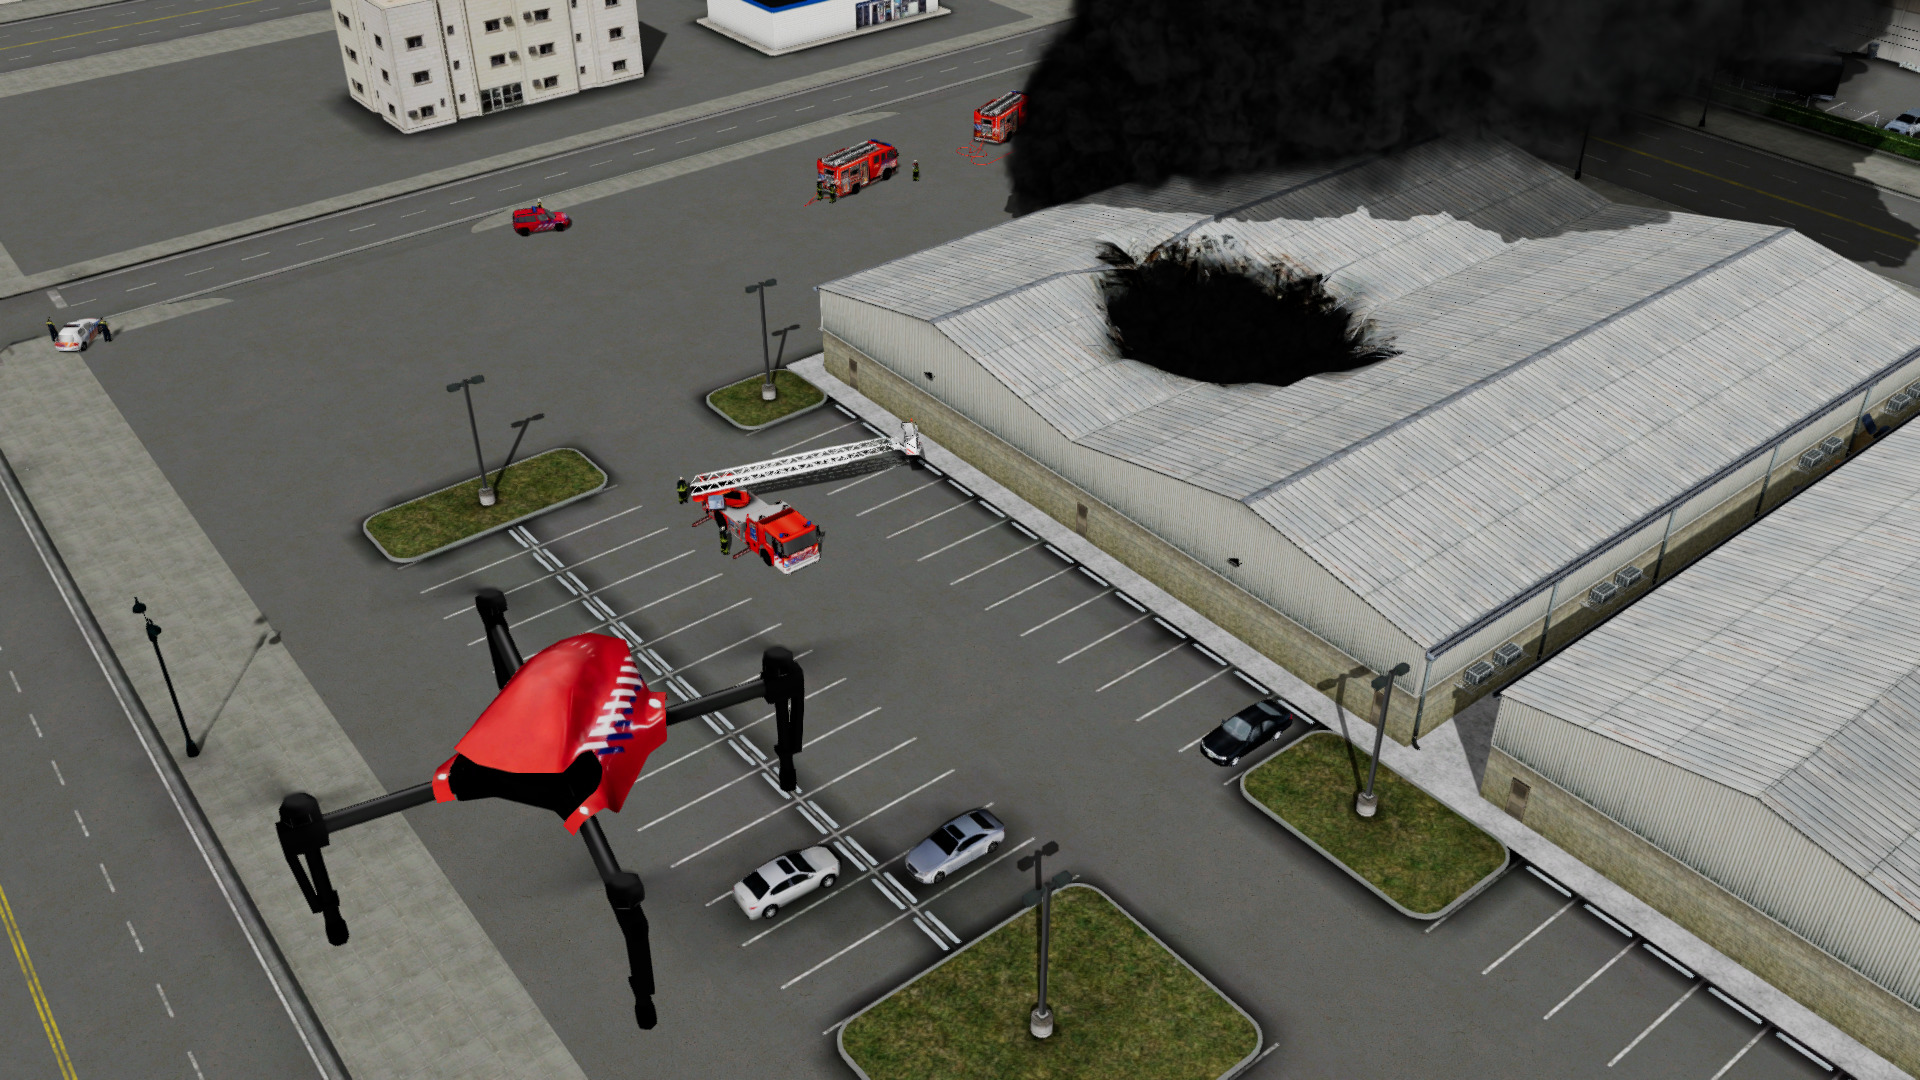 Drone deployed at a large warehouse fire by a fire service pilot to provide an aerial viewpoint for the incident commanders.